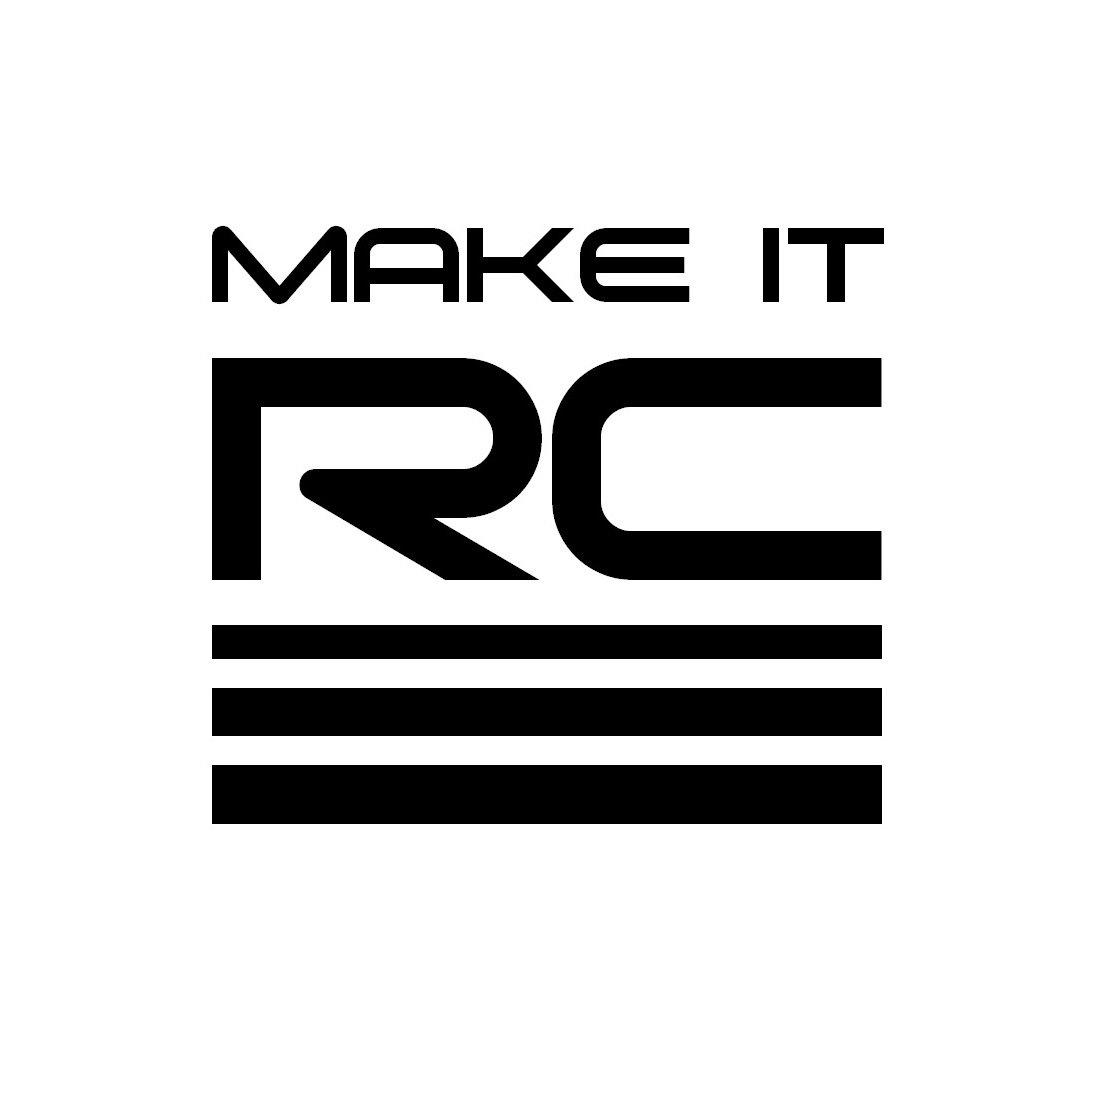 Custom RC vehicles, drones, 3D Printing,  and more! Check out our YT channel and other social media sites for regular project updates and how to videos